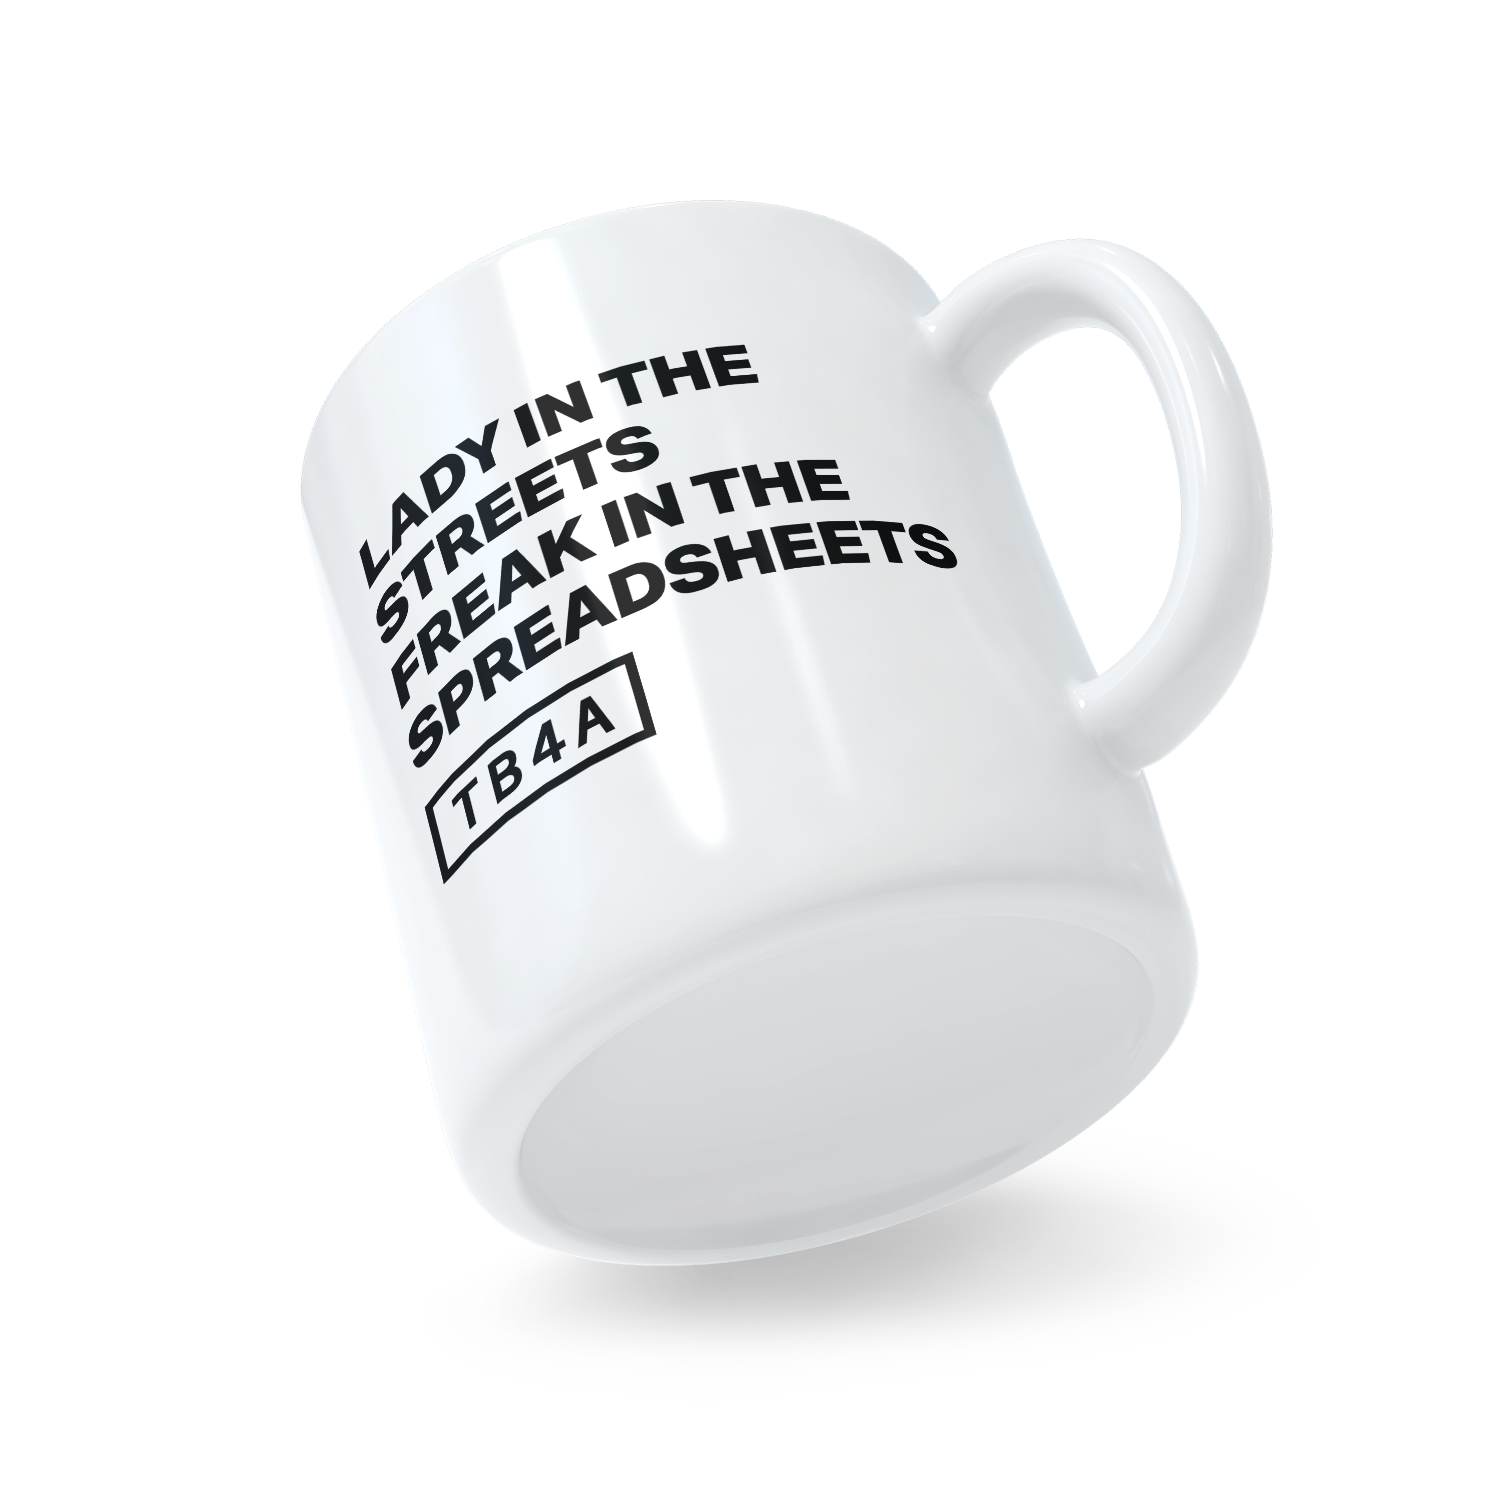 Lady In The Streets Freak In The Spreadsheets Mug